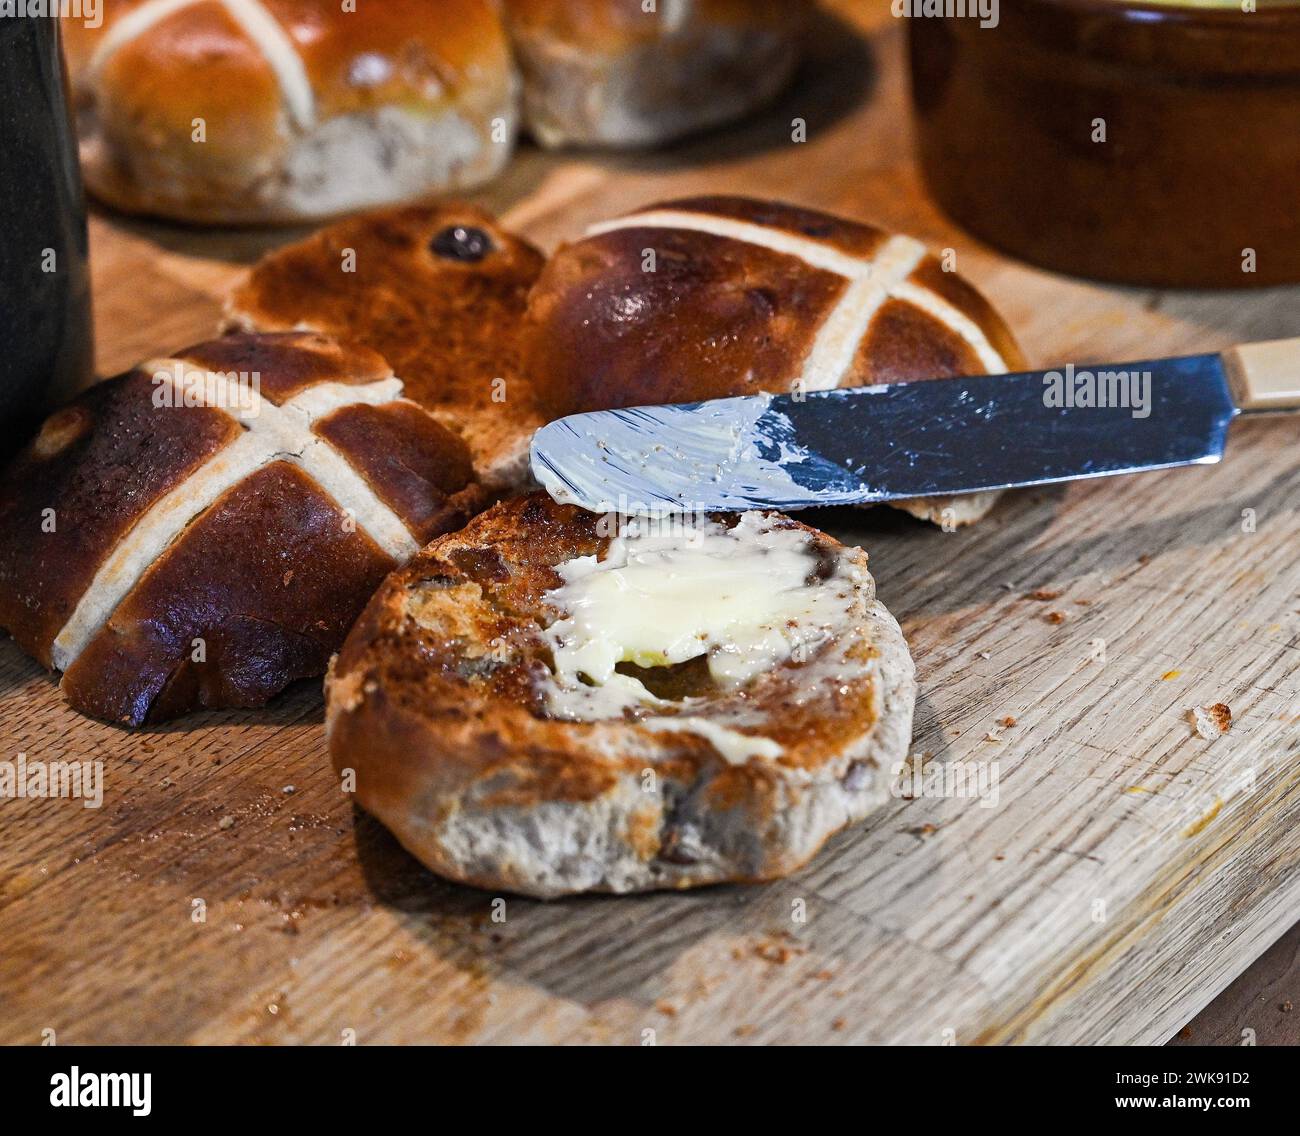 Toasted Hot Cross Buns with butter a traditional breakfast food eaten at Easter Stock Photo